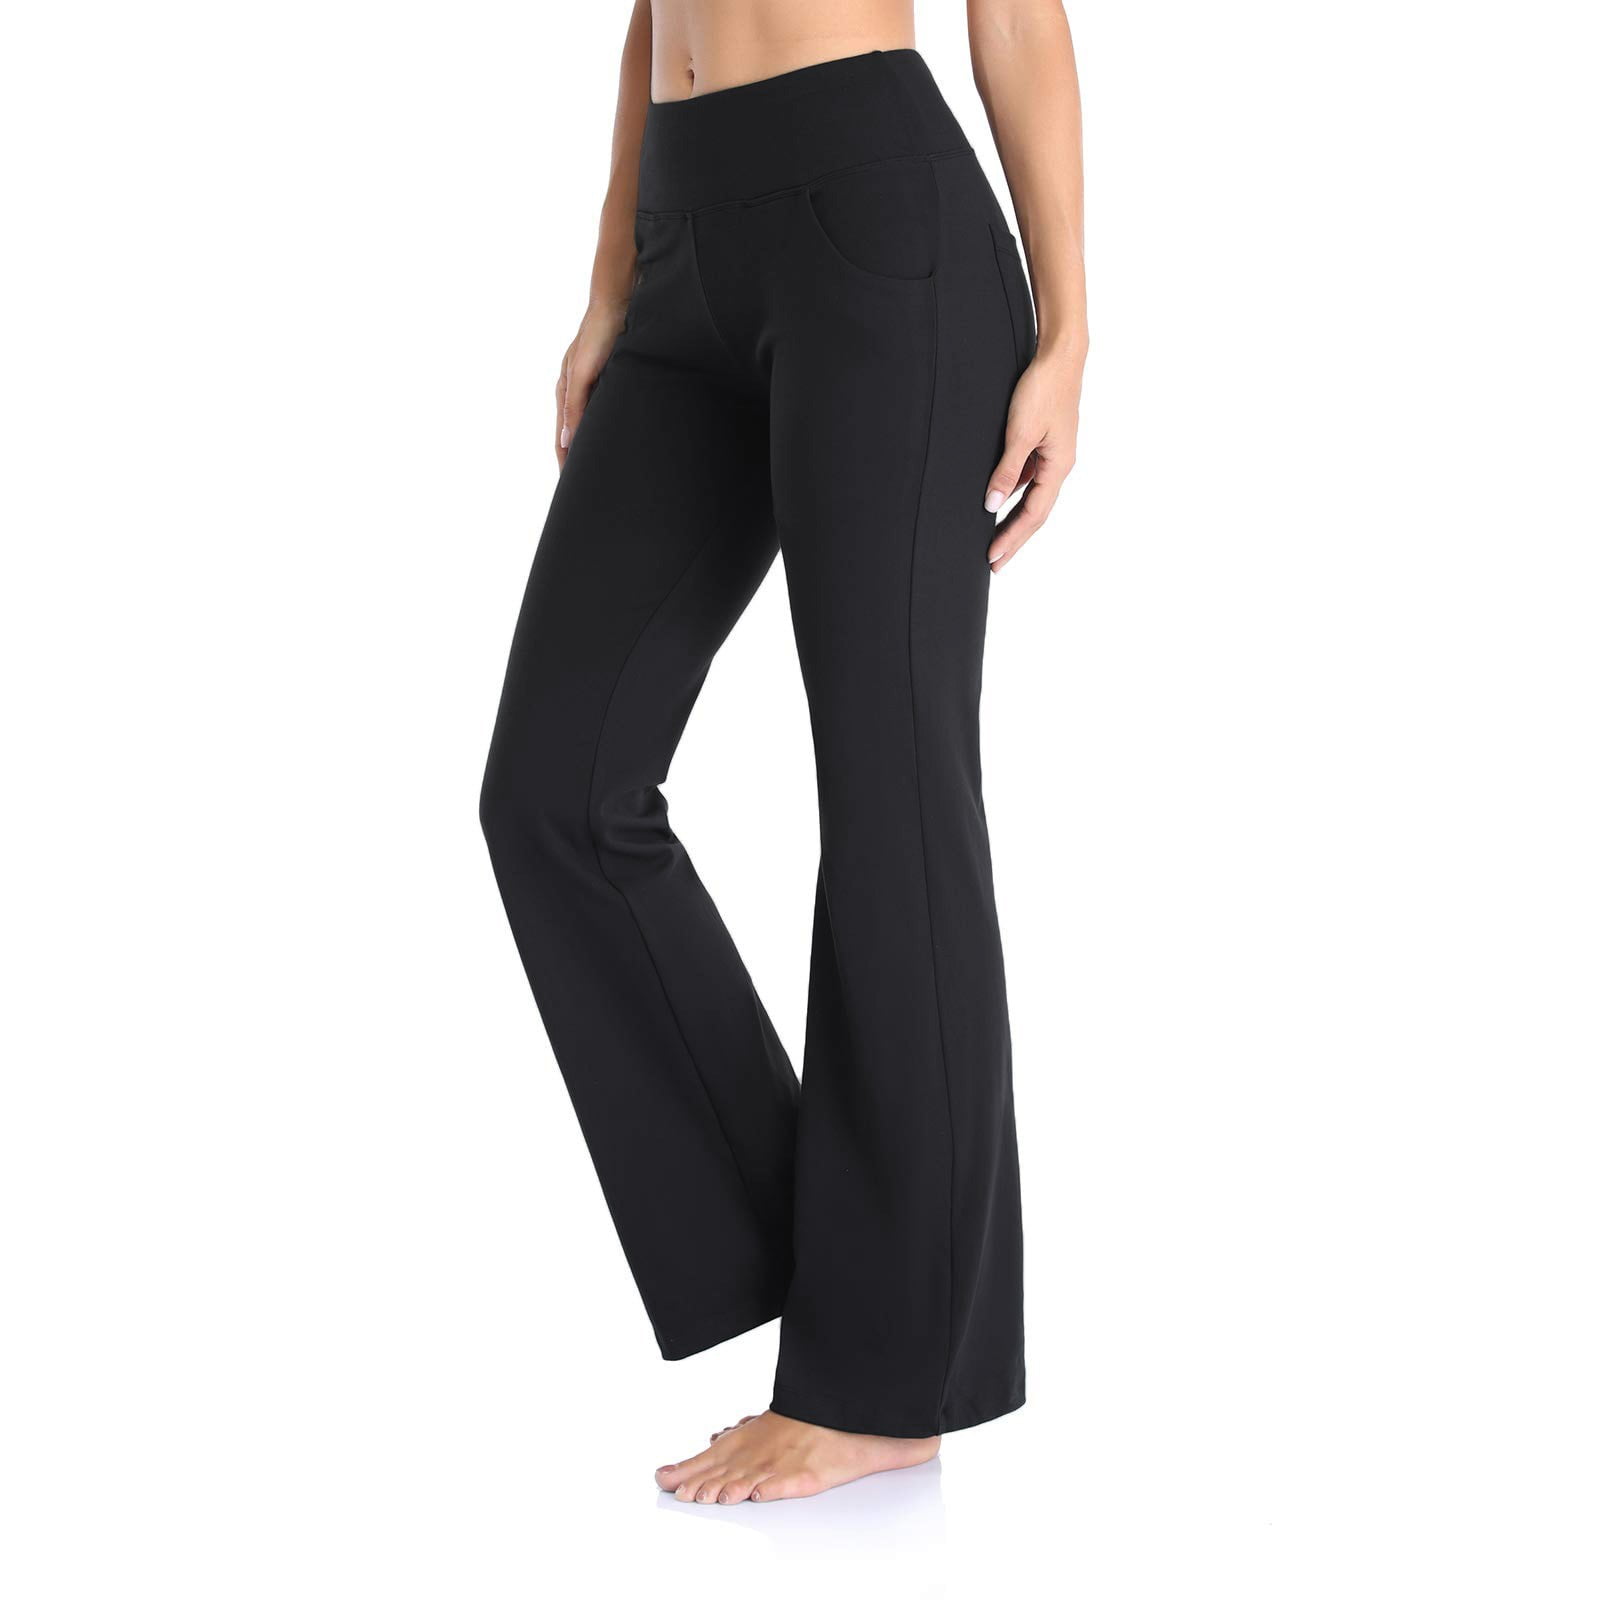 fvwitlyh Bell Bottom Yoga Pants for Women plus Size Wide Fitness